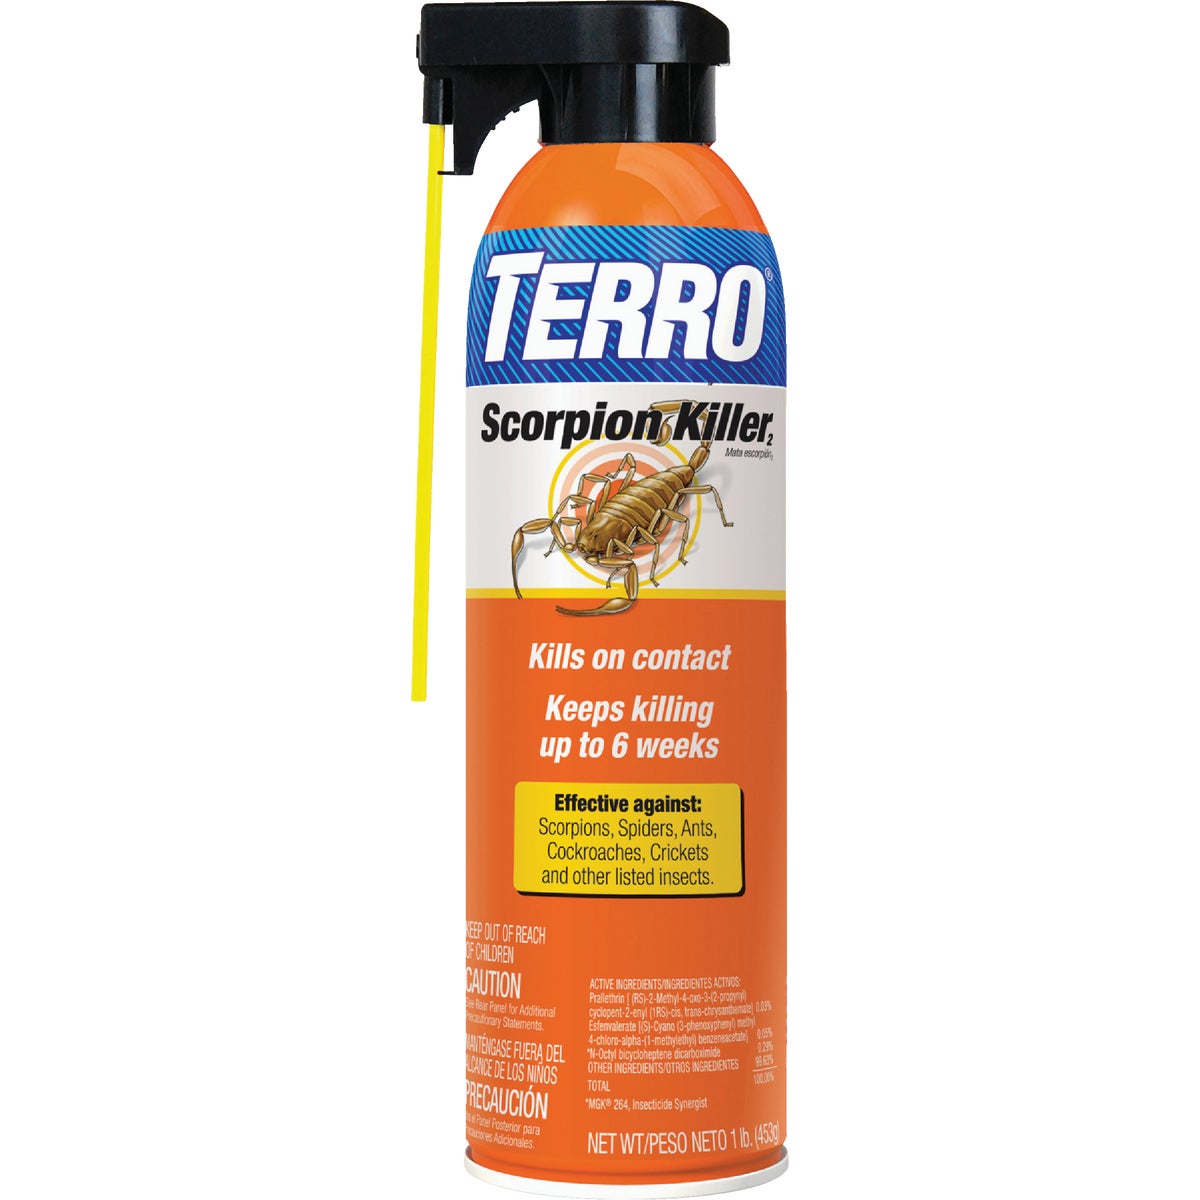 Item 735735, Put an end to scorpions in and around the home with TERRO Scorpion Killer 